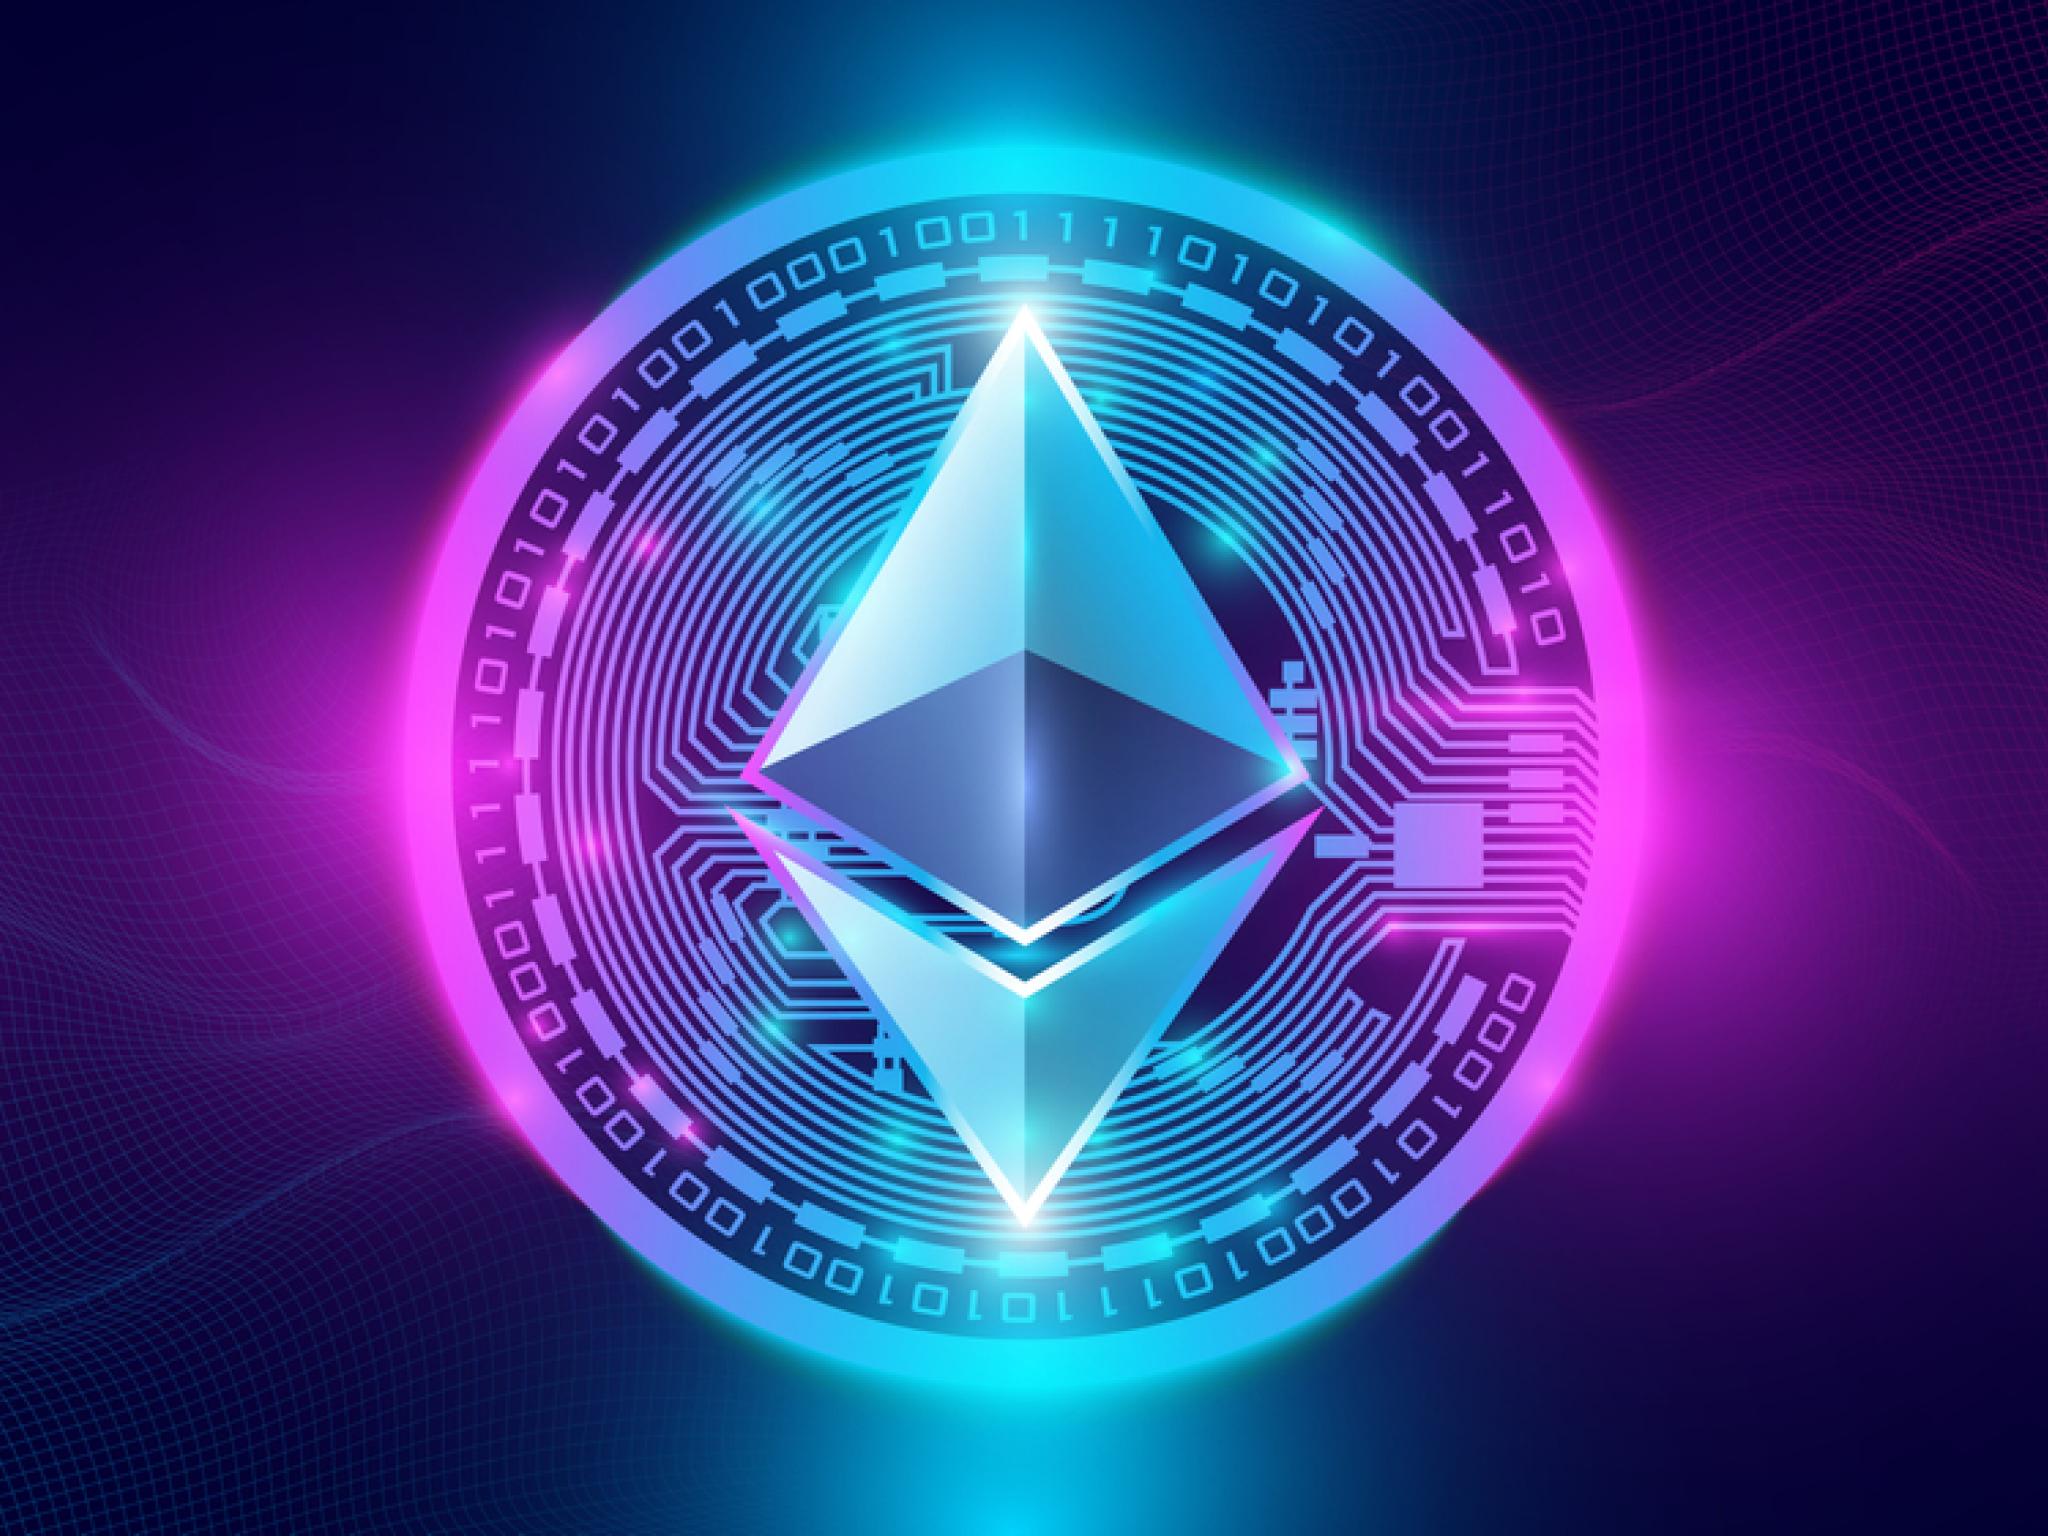  ethereum-could-hit-10k-by-year-end-says-analyst-signaling-significant-bullish-move 